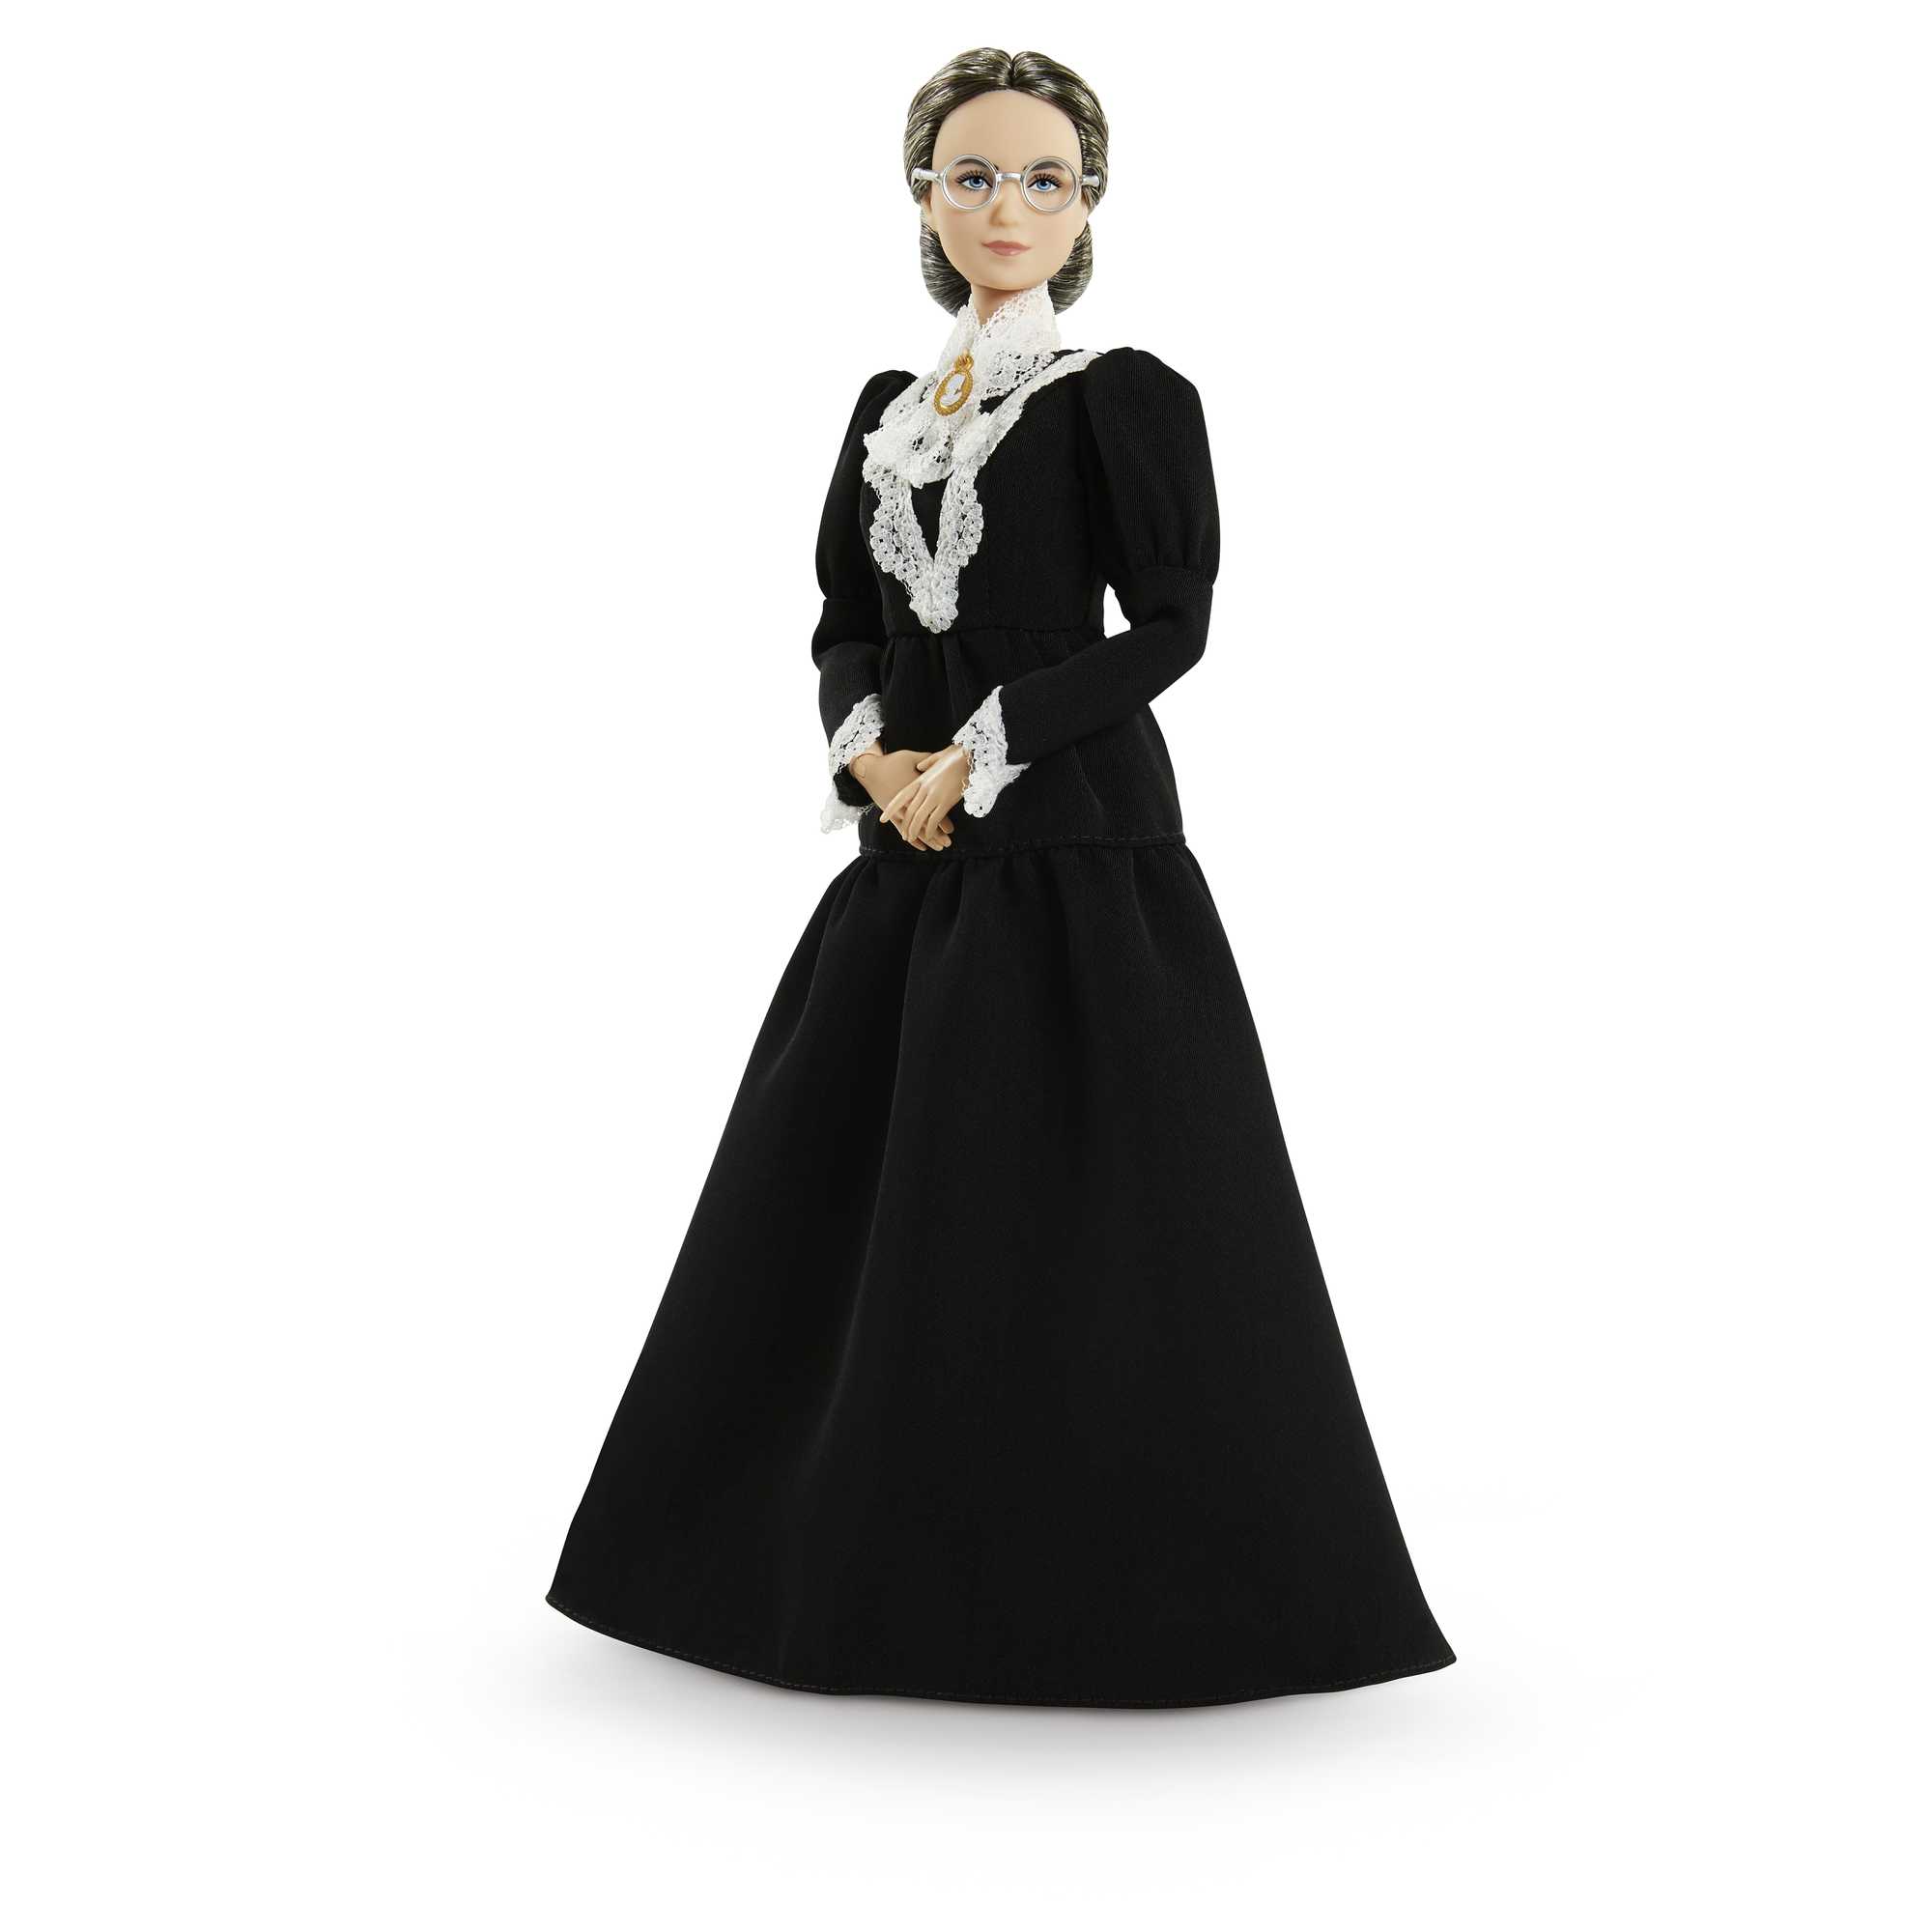 Barbie Inspiring Women Susan B. Anthony Collectible Doll in Black Dress with Doll Stand - image 1 of 7